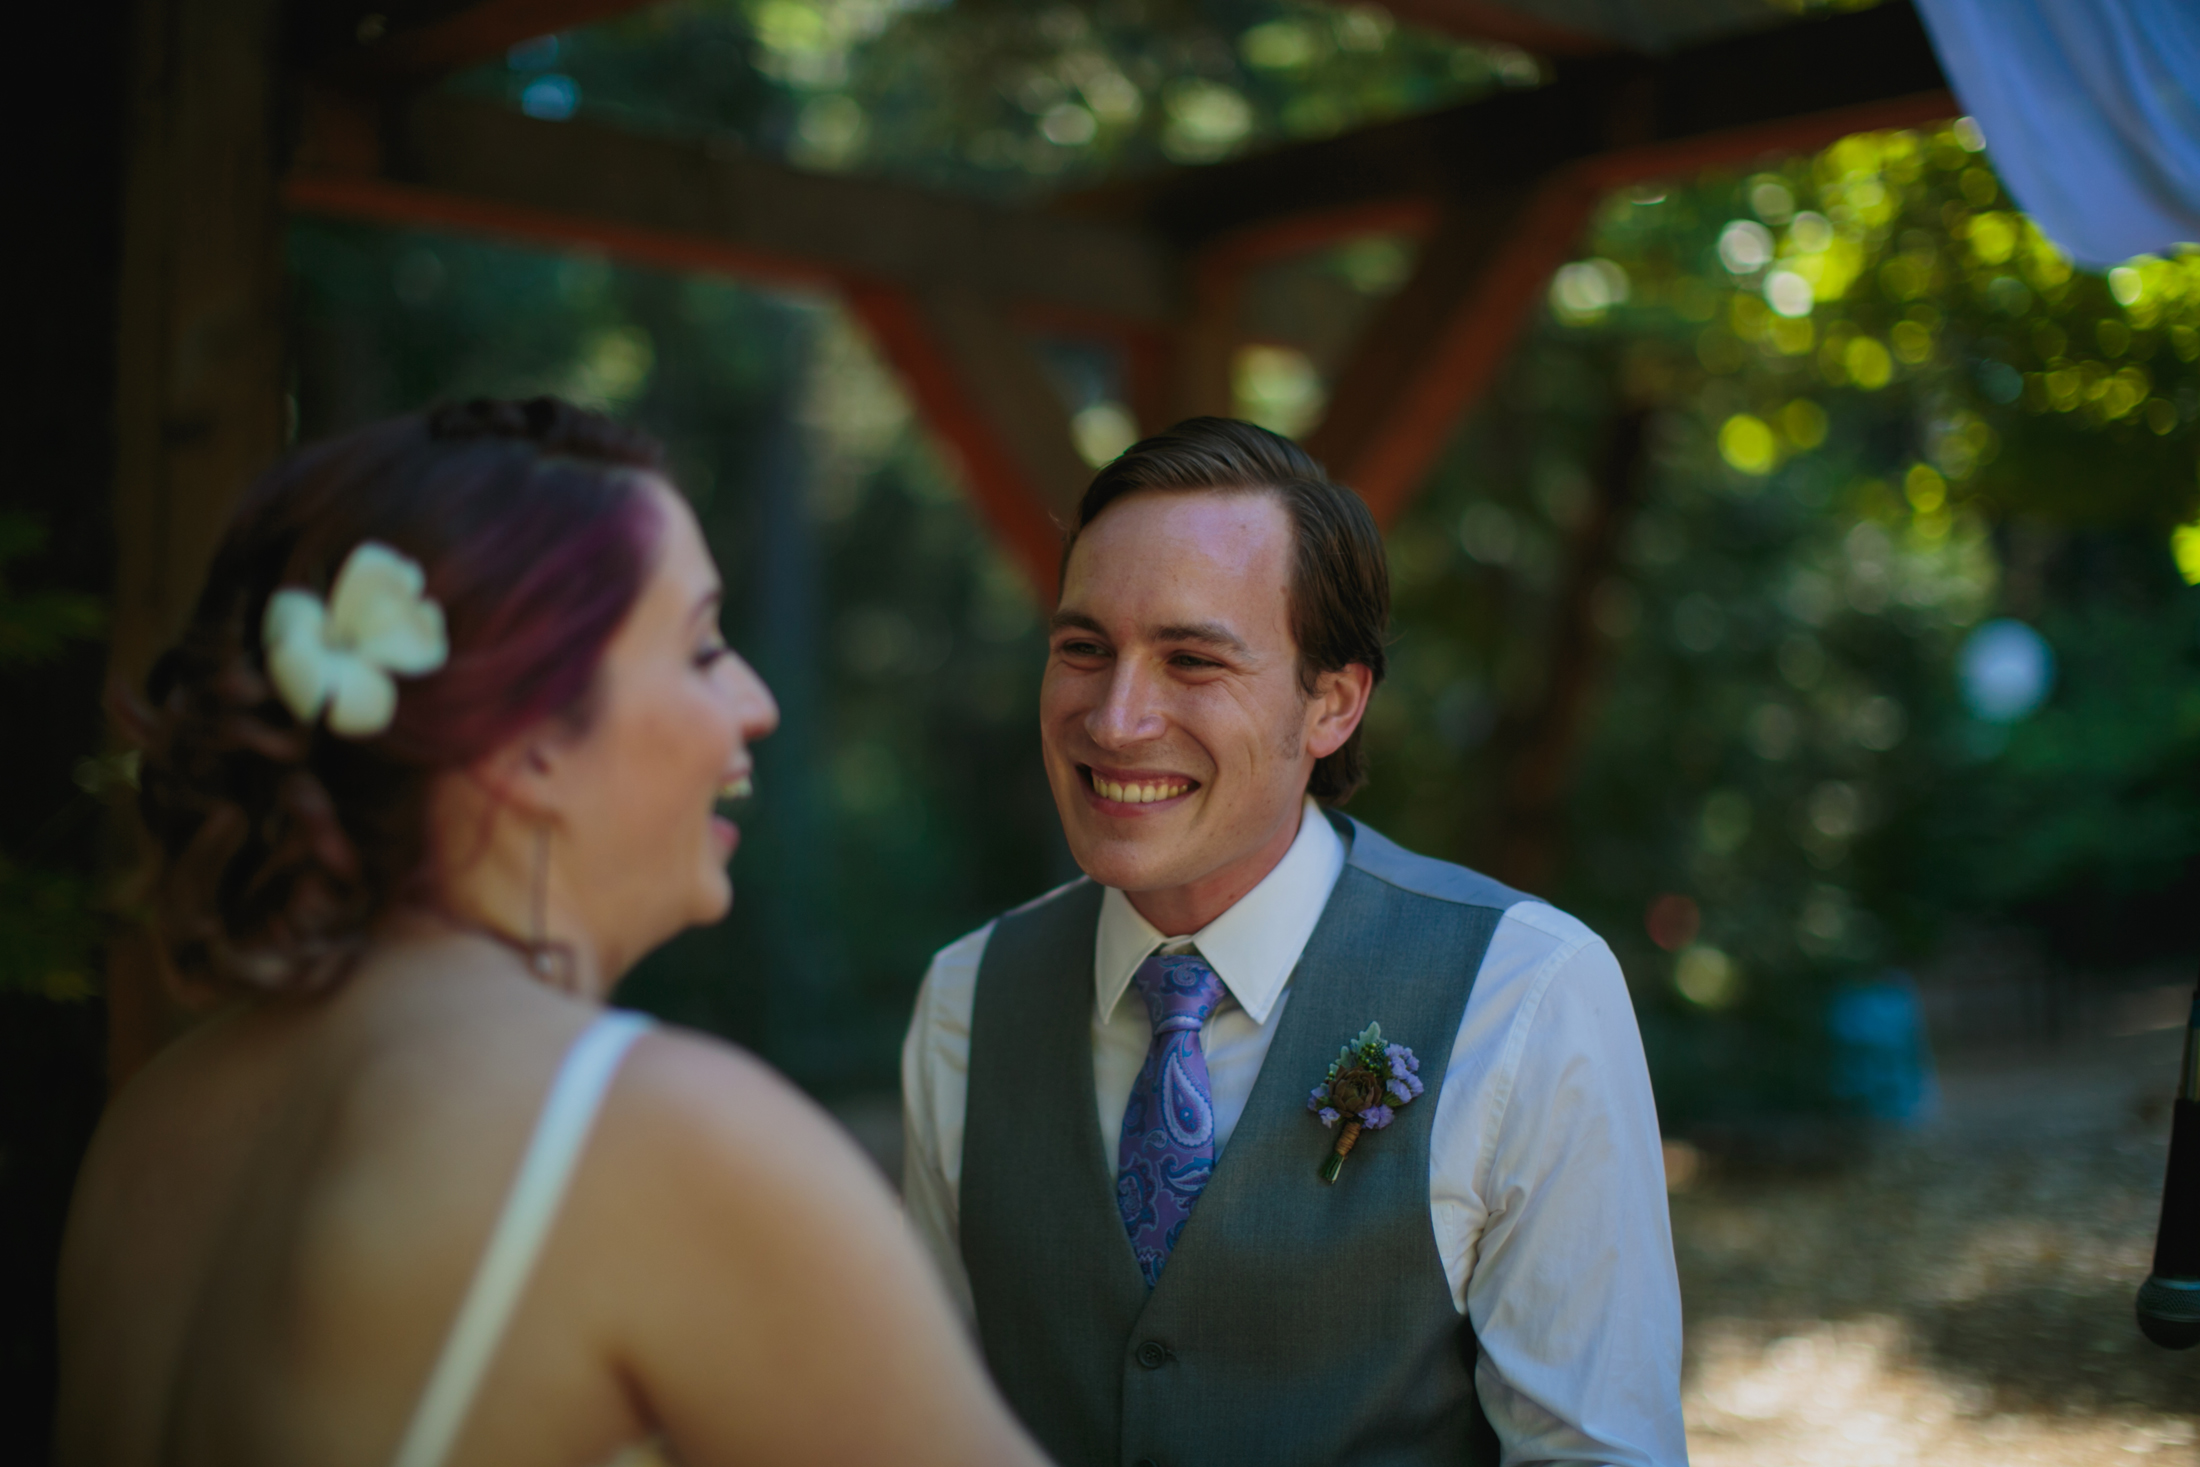 The groom is smiling at his bride while she laughs looking at their guests.